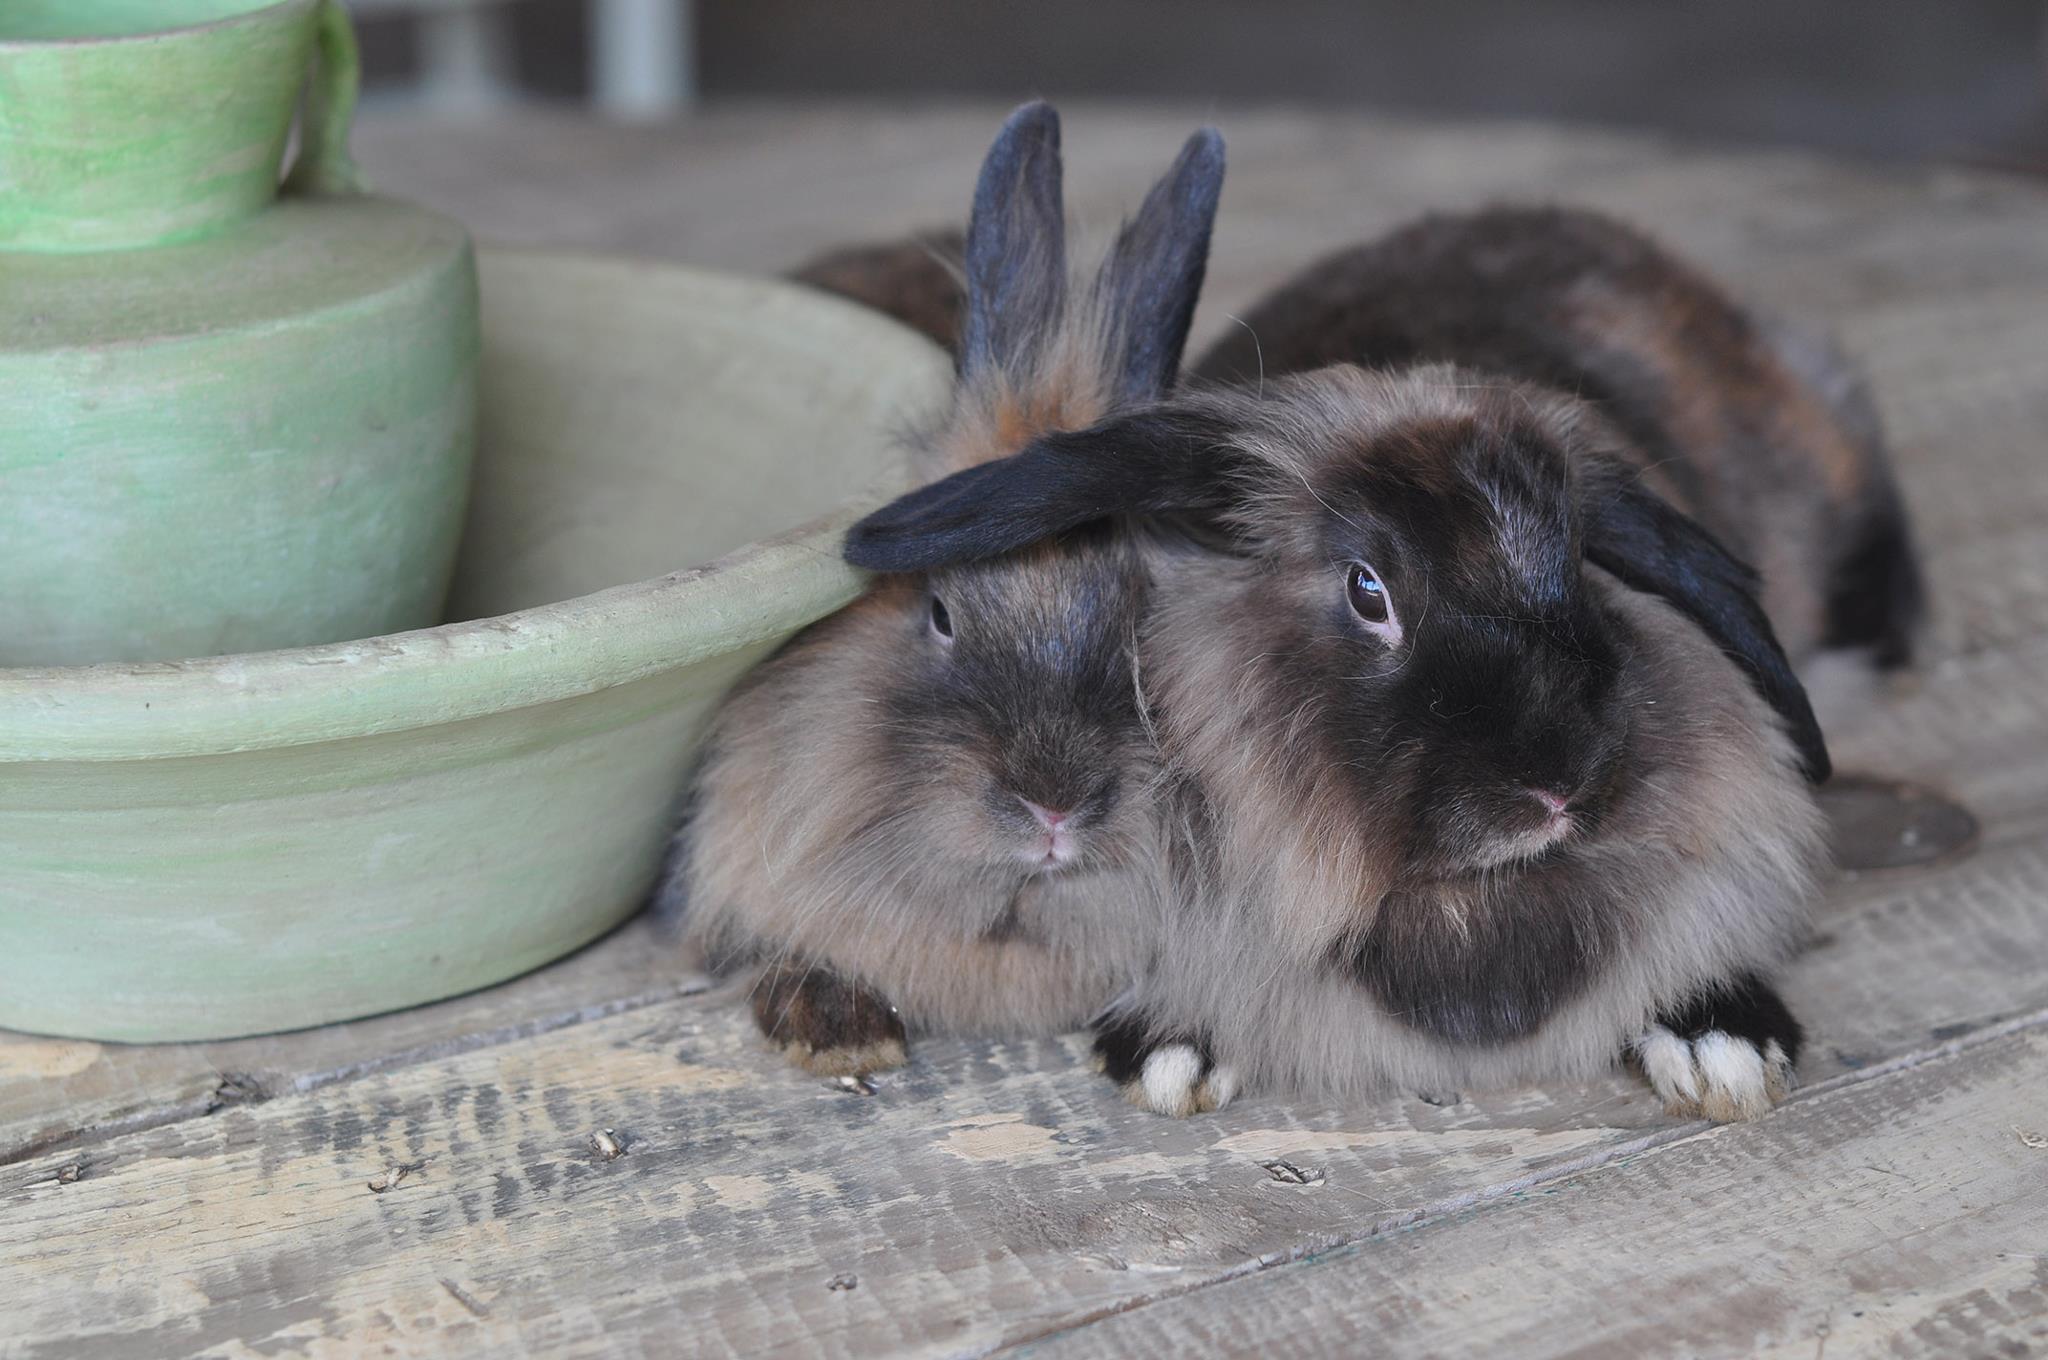 Bunny's Head Provides a Nice Ear-Rest for Her Friend